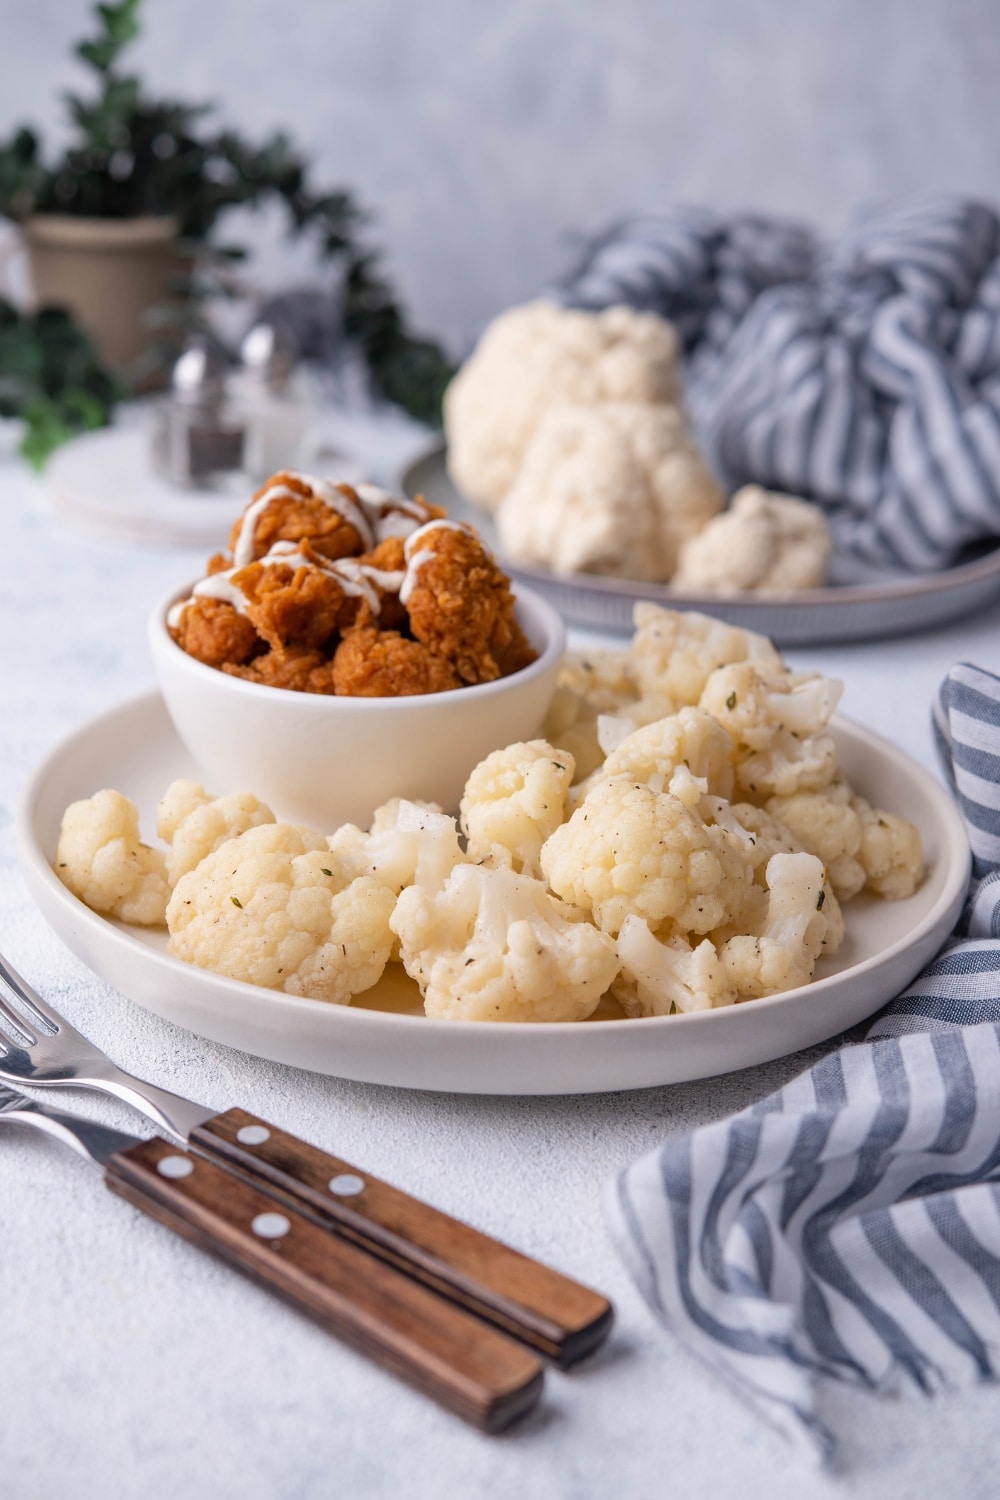 Sauteed cauliflower on a white plate with a small bowl of fried chicken drizzled with white sauce. Next to the plate are two forks with wooden handles and behind it is a plate of raw cauliflower, a draped tea towel, and a pair of salt and pepper shakers.